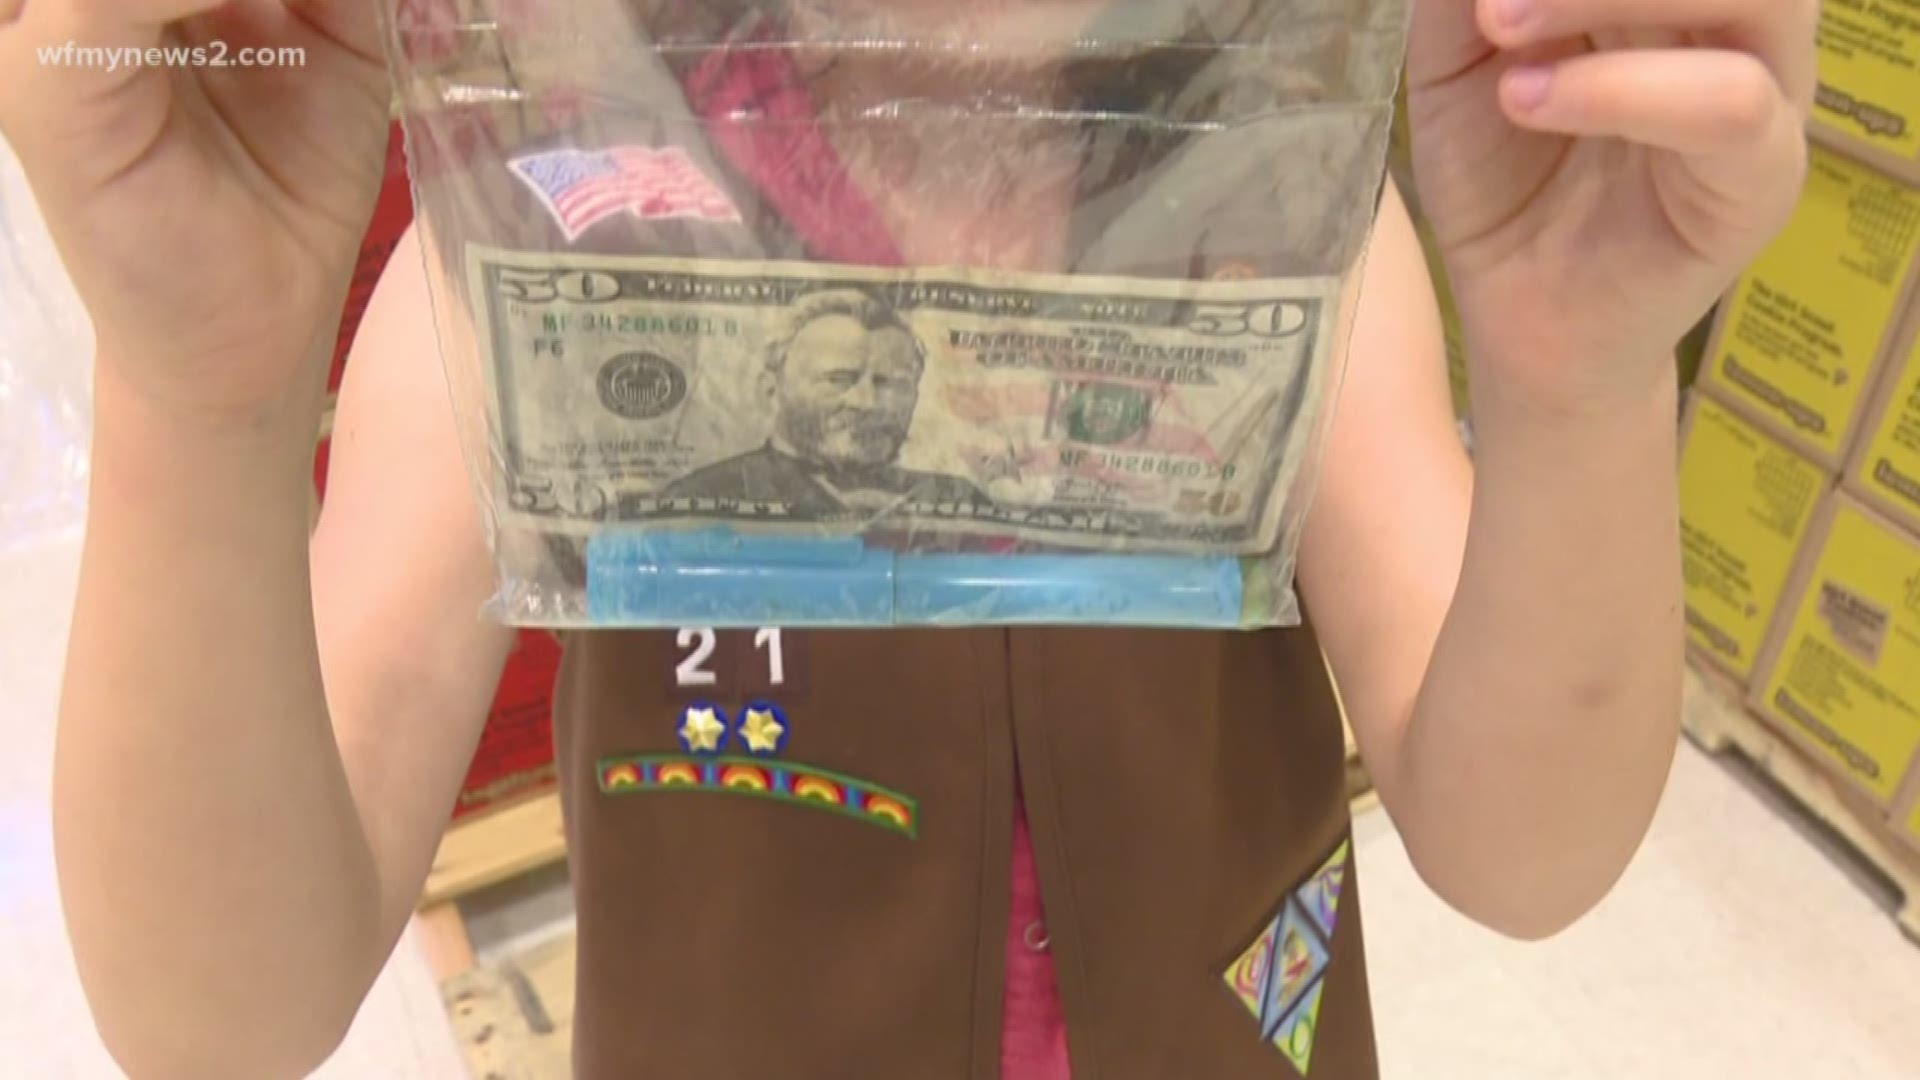 2 Wants to Know is help you figure out how to spot counterfeit cash.